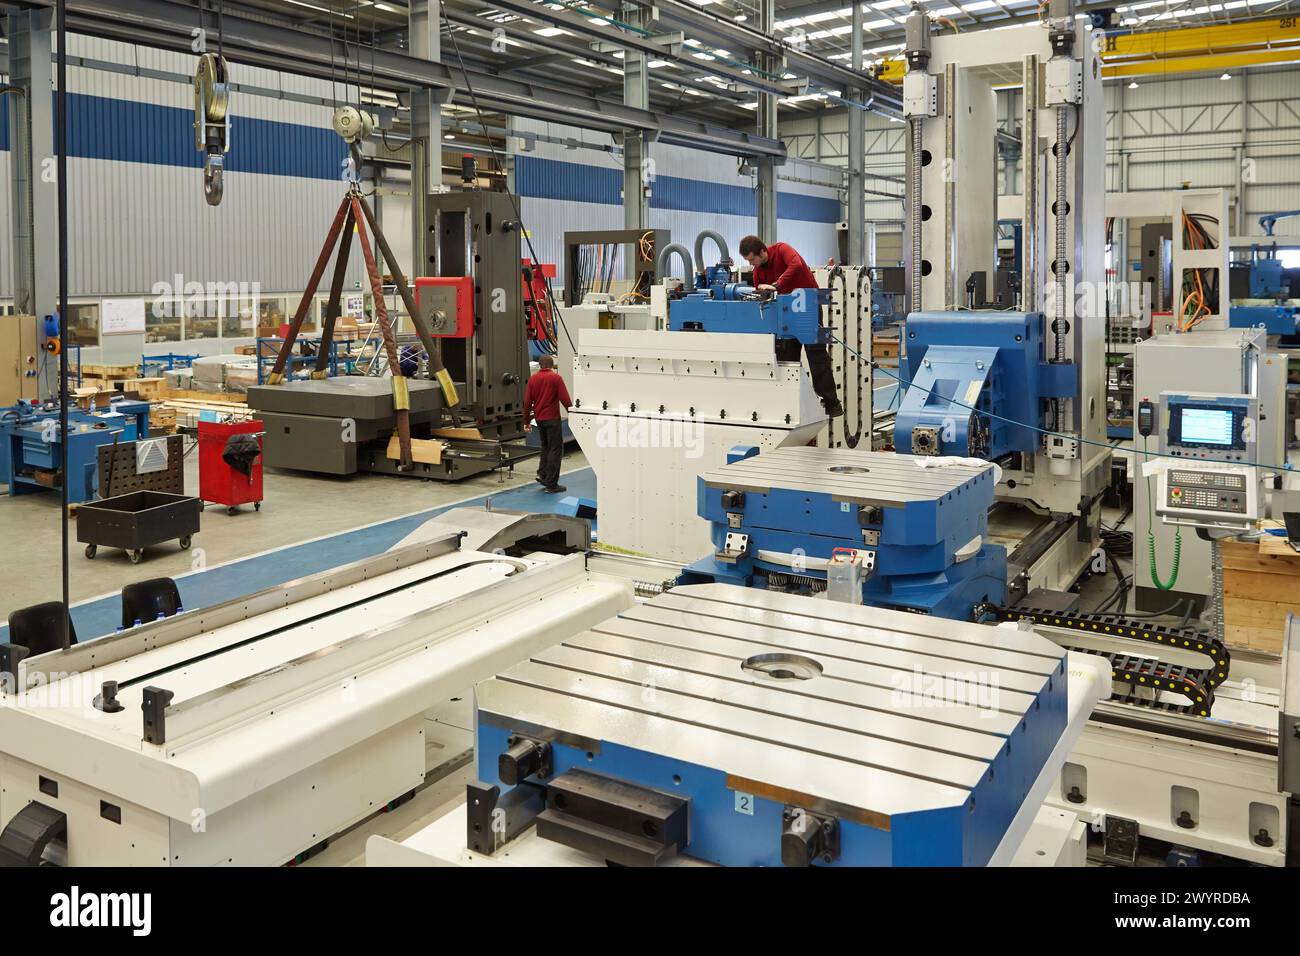 Manufacture of machine tools. Industry. Gipuzkoa. Basque country. Spain. Stock Photo